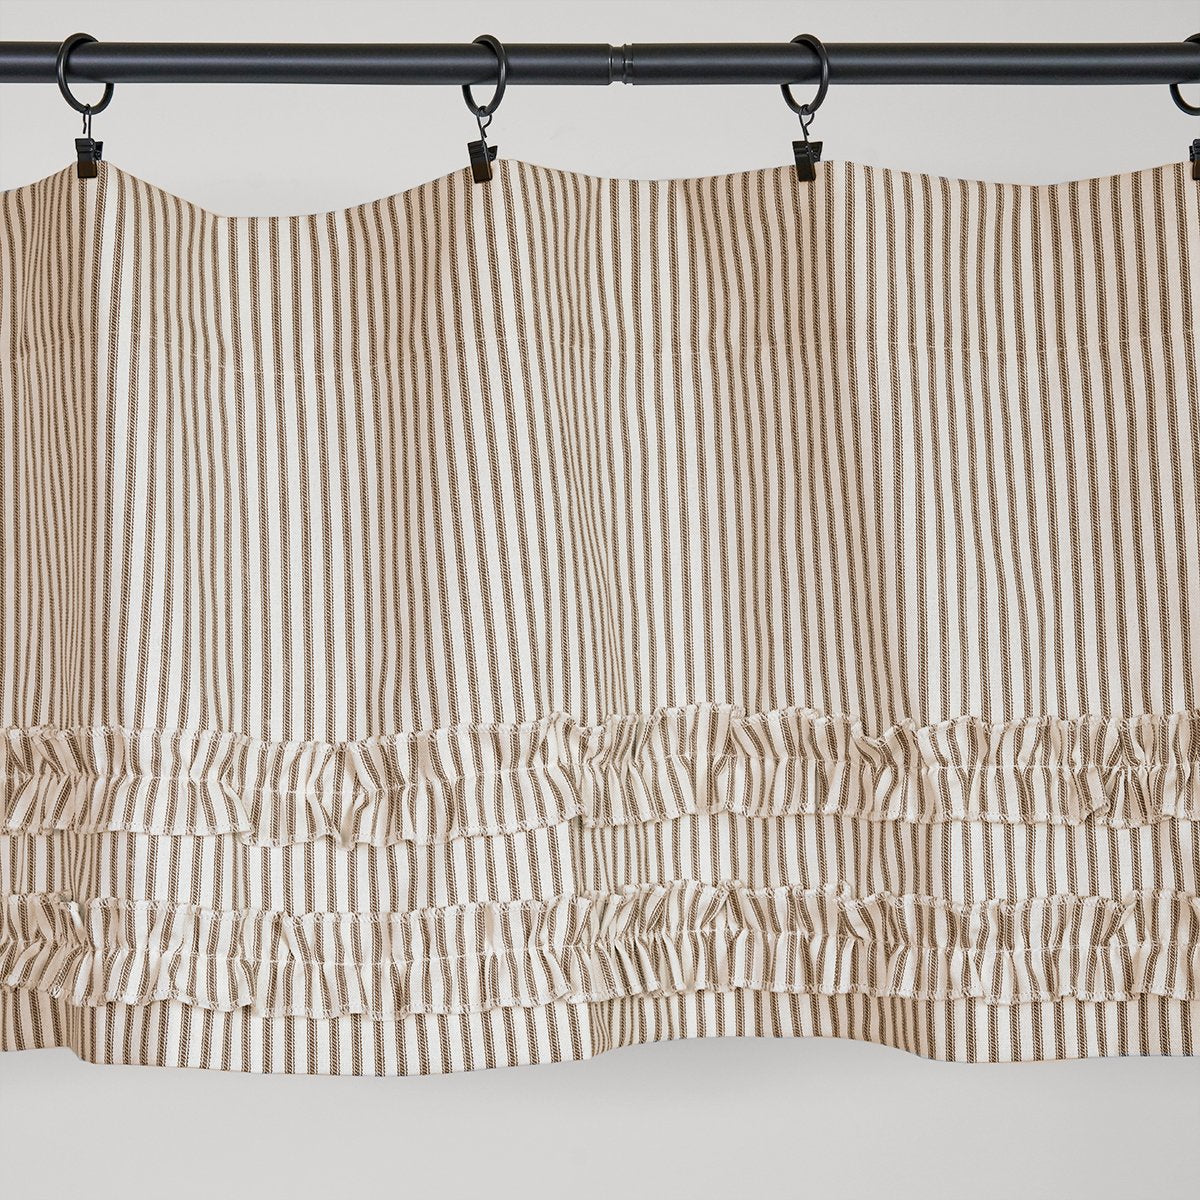 Ticking Stripe Valance with Ruffles Brown